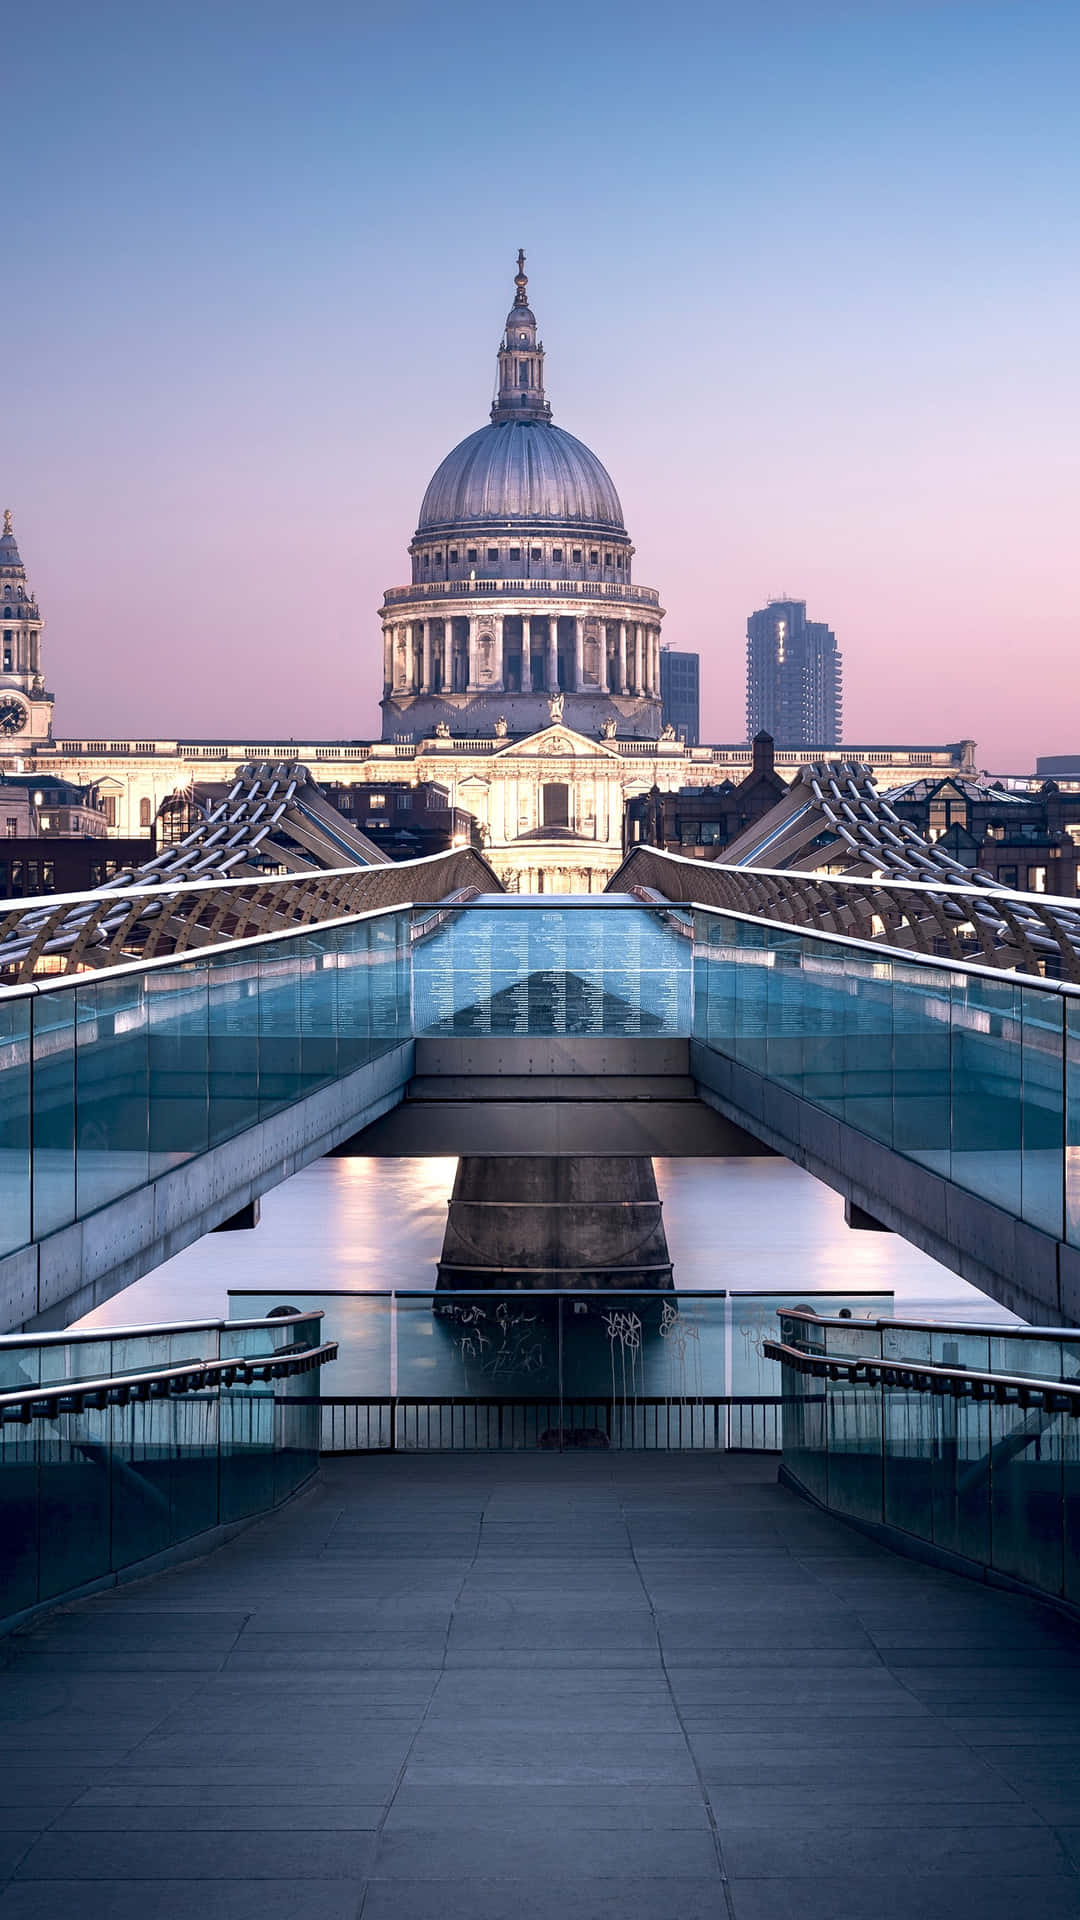 Discover London's sights on your iPhone Wallpaper